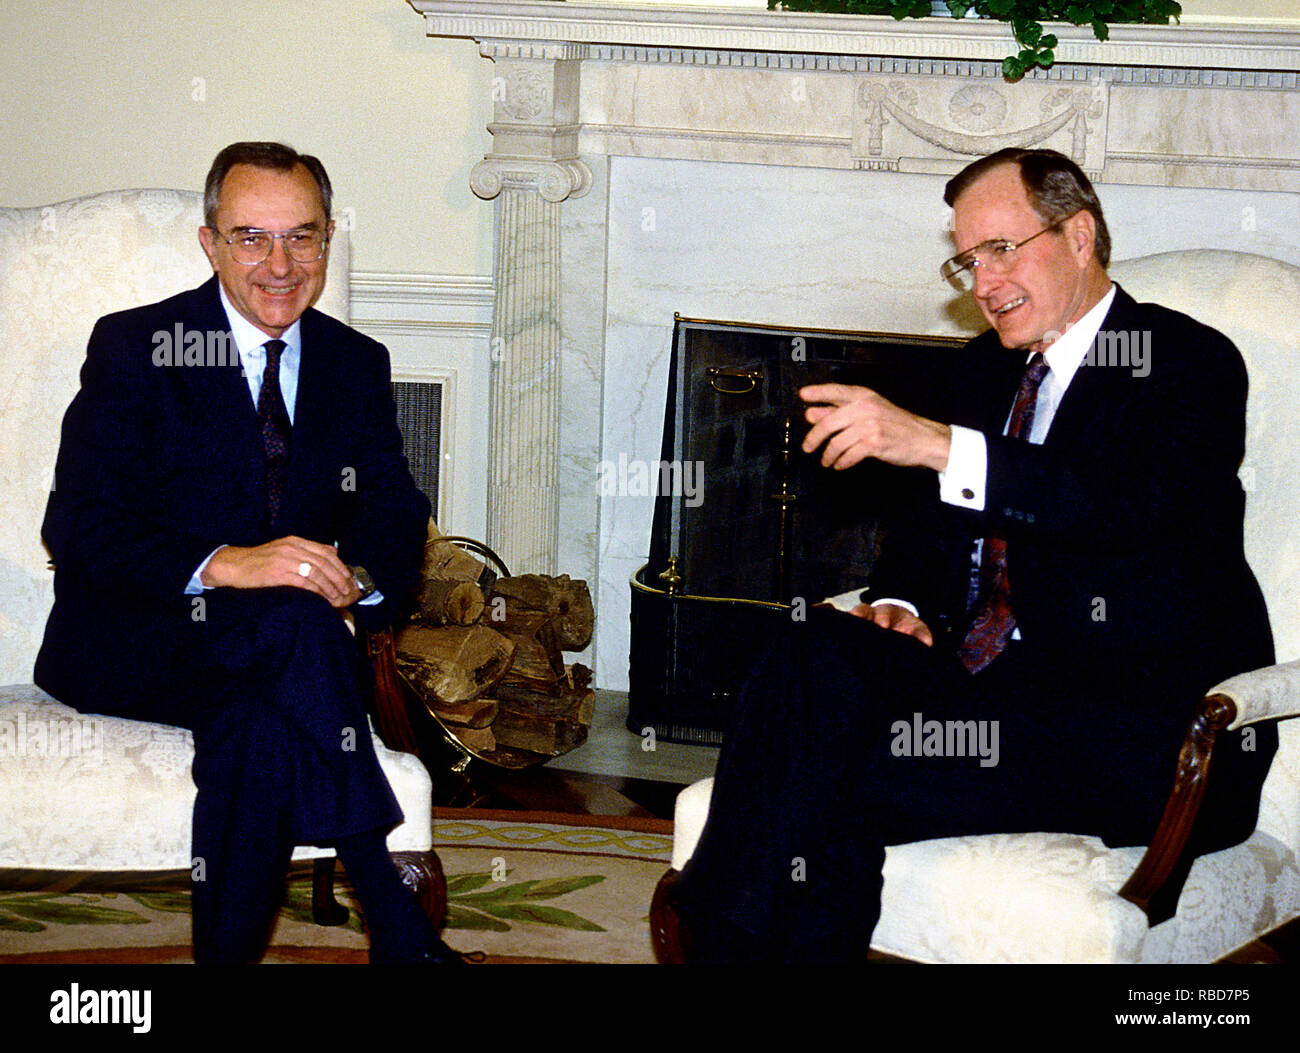 Washington, United States Of America. 22nd Mar, 2008. Washington, DC - (FILE) -- United States President George H.W. Bush, right, meets Foreign Minister Moshe Arens of Israel in the Oval Office of the White House in Washington, DC on Monday, March 13, 1989.Credit: Arnie Sachs/CNP | usage worldwide Credit: dpa/Alamy Live News Stock Photo